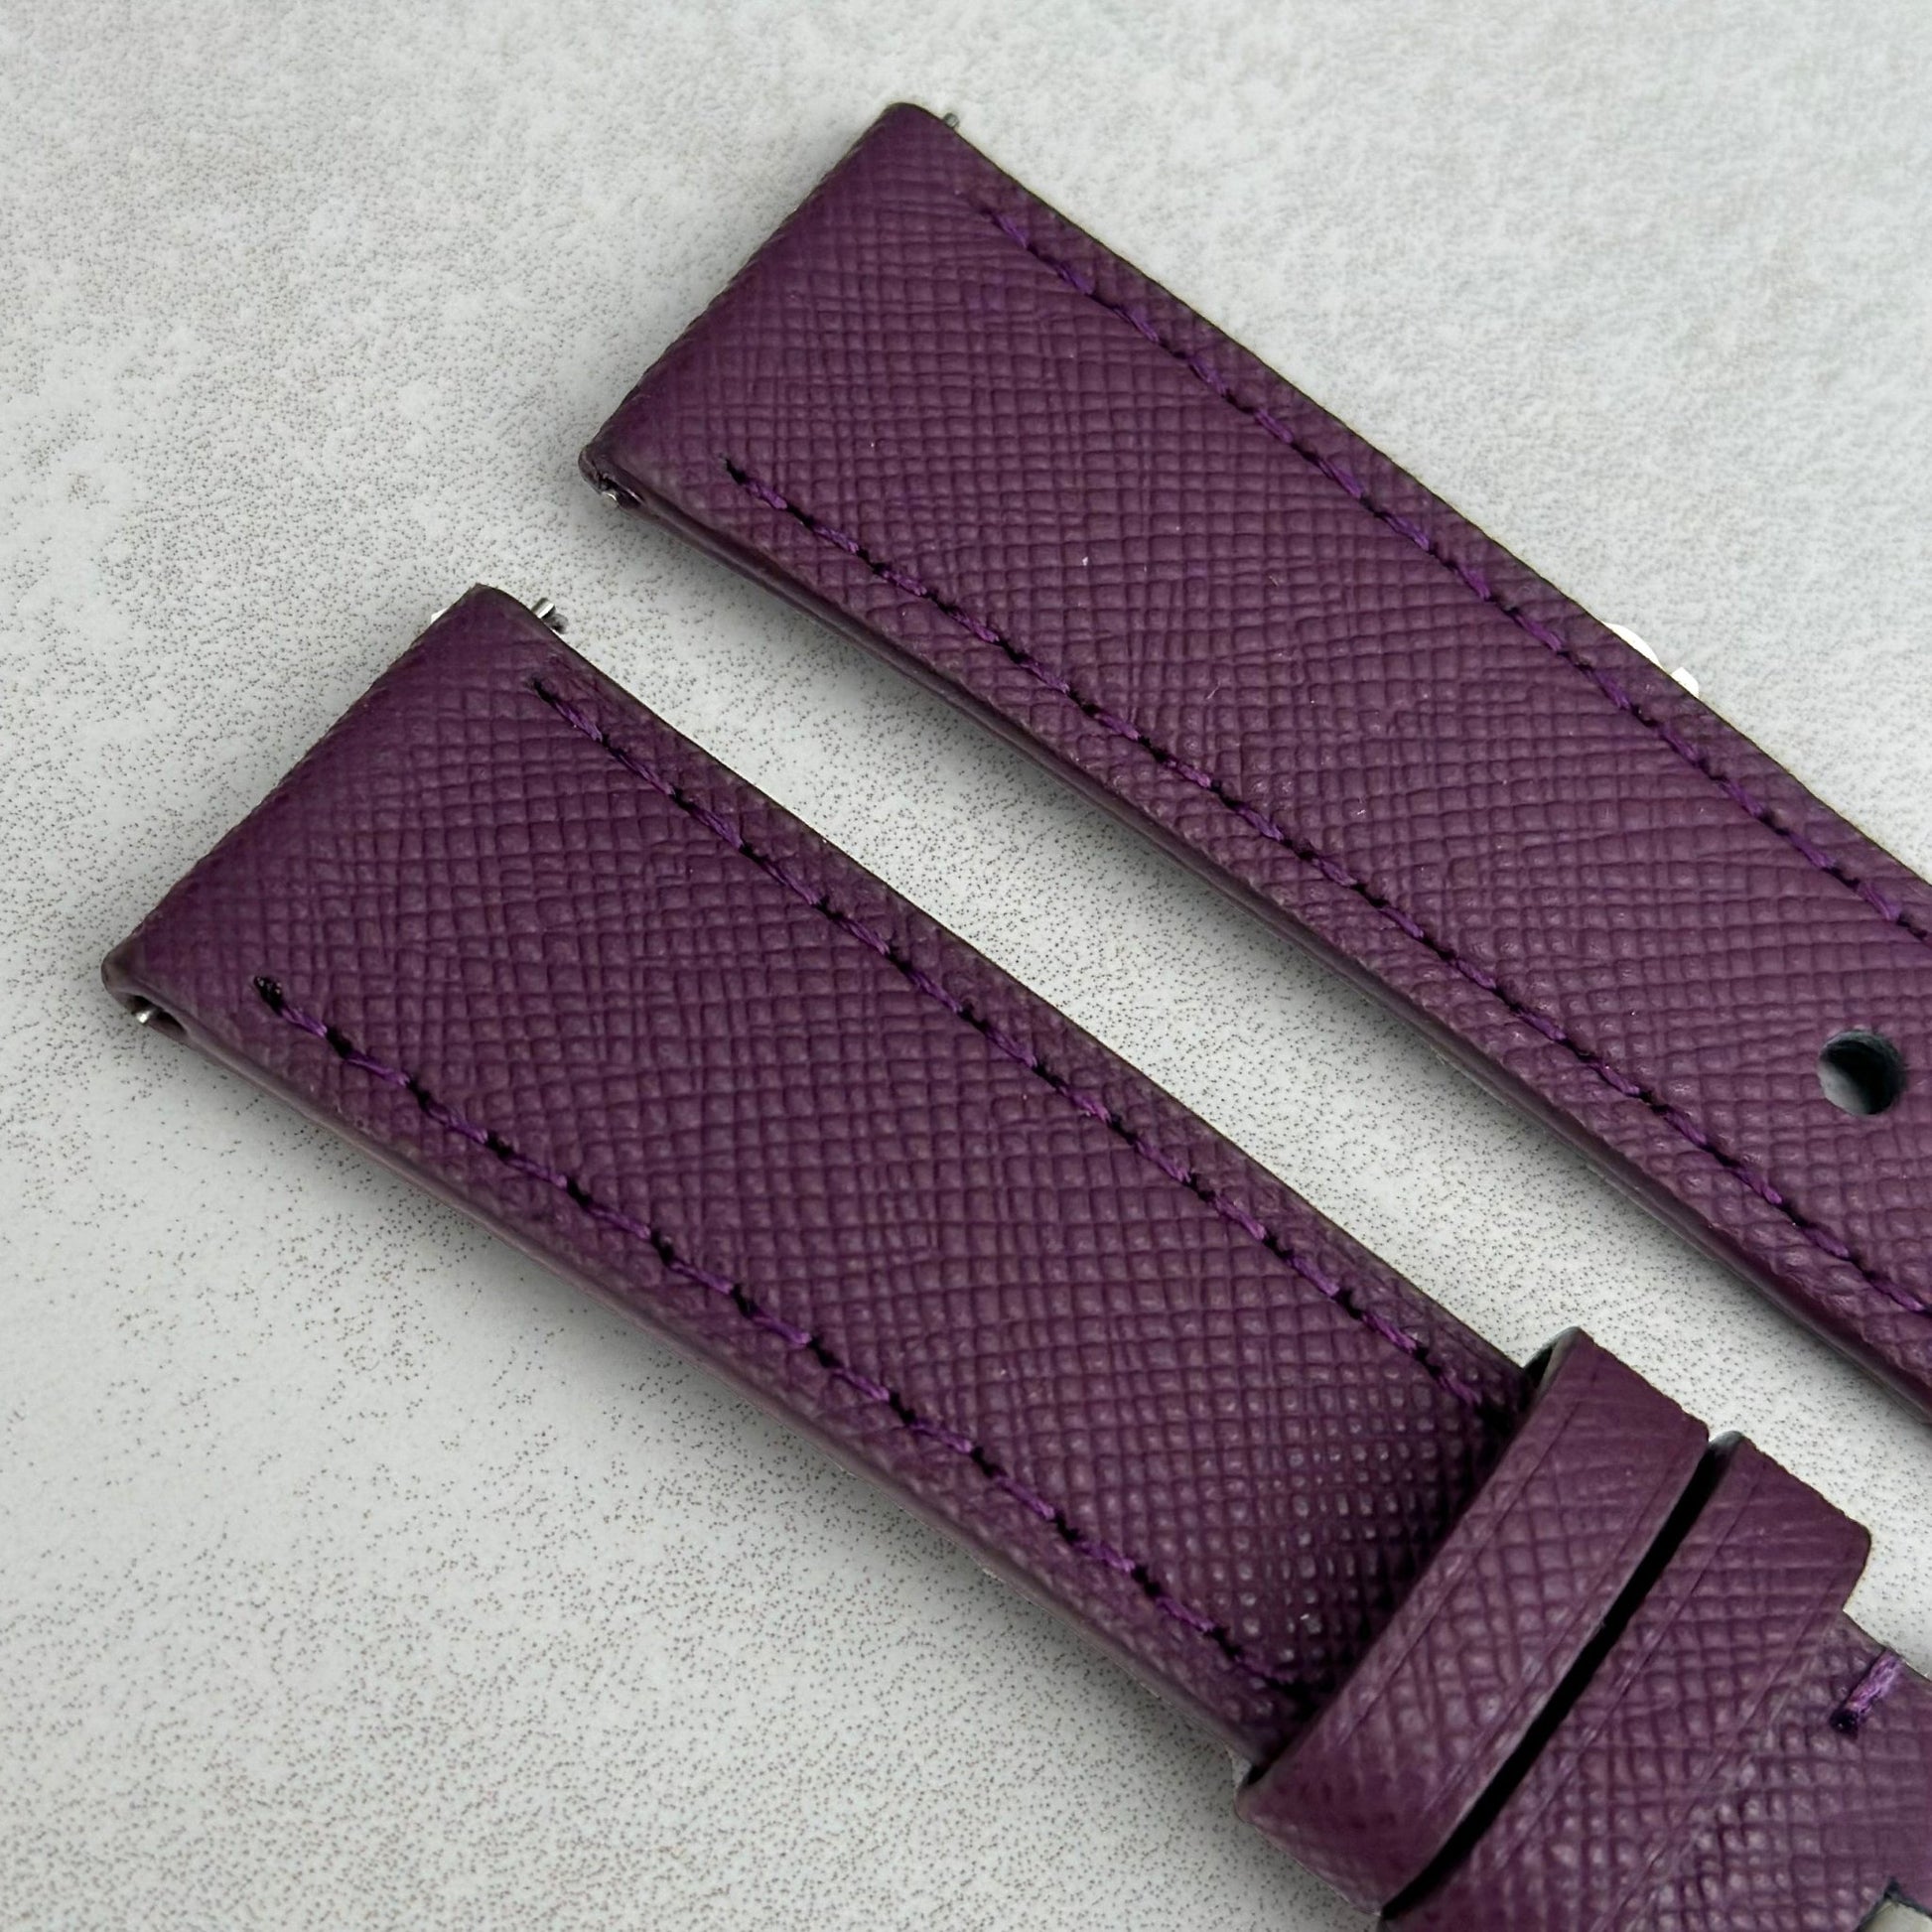 Top of the Florence Royal Purple Saffiano leather watch strap. 18mm, 20mm, 22mm, 24mm. Watch And Strap.